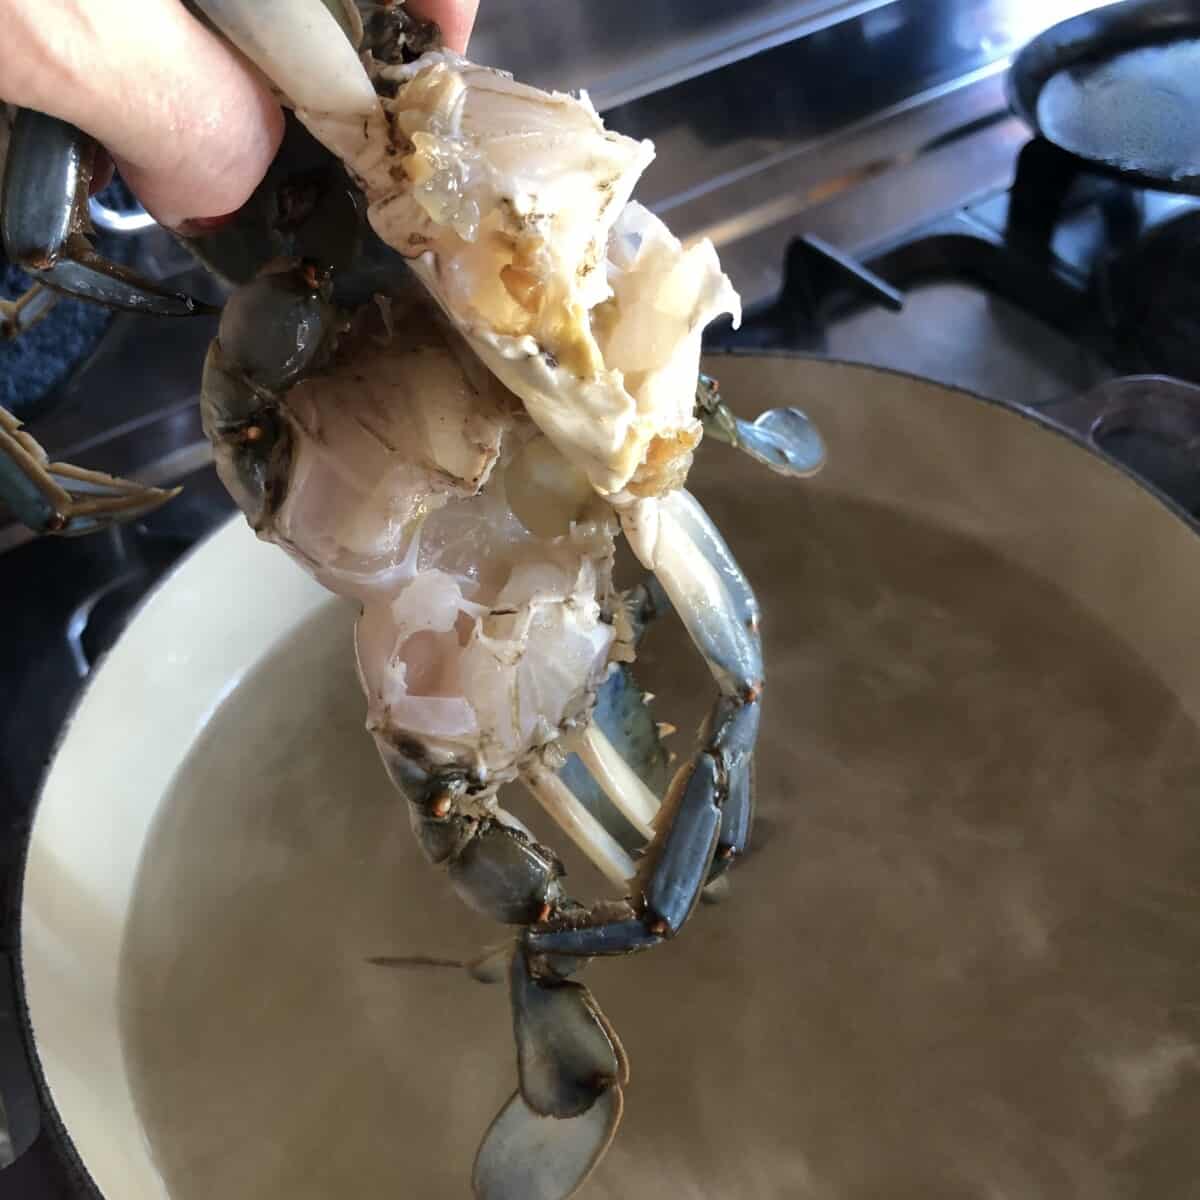 adding cleaned blue crab to the crab boil.